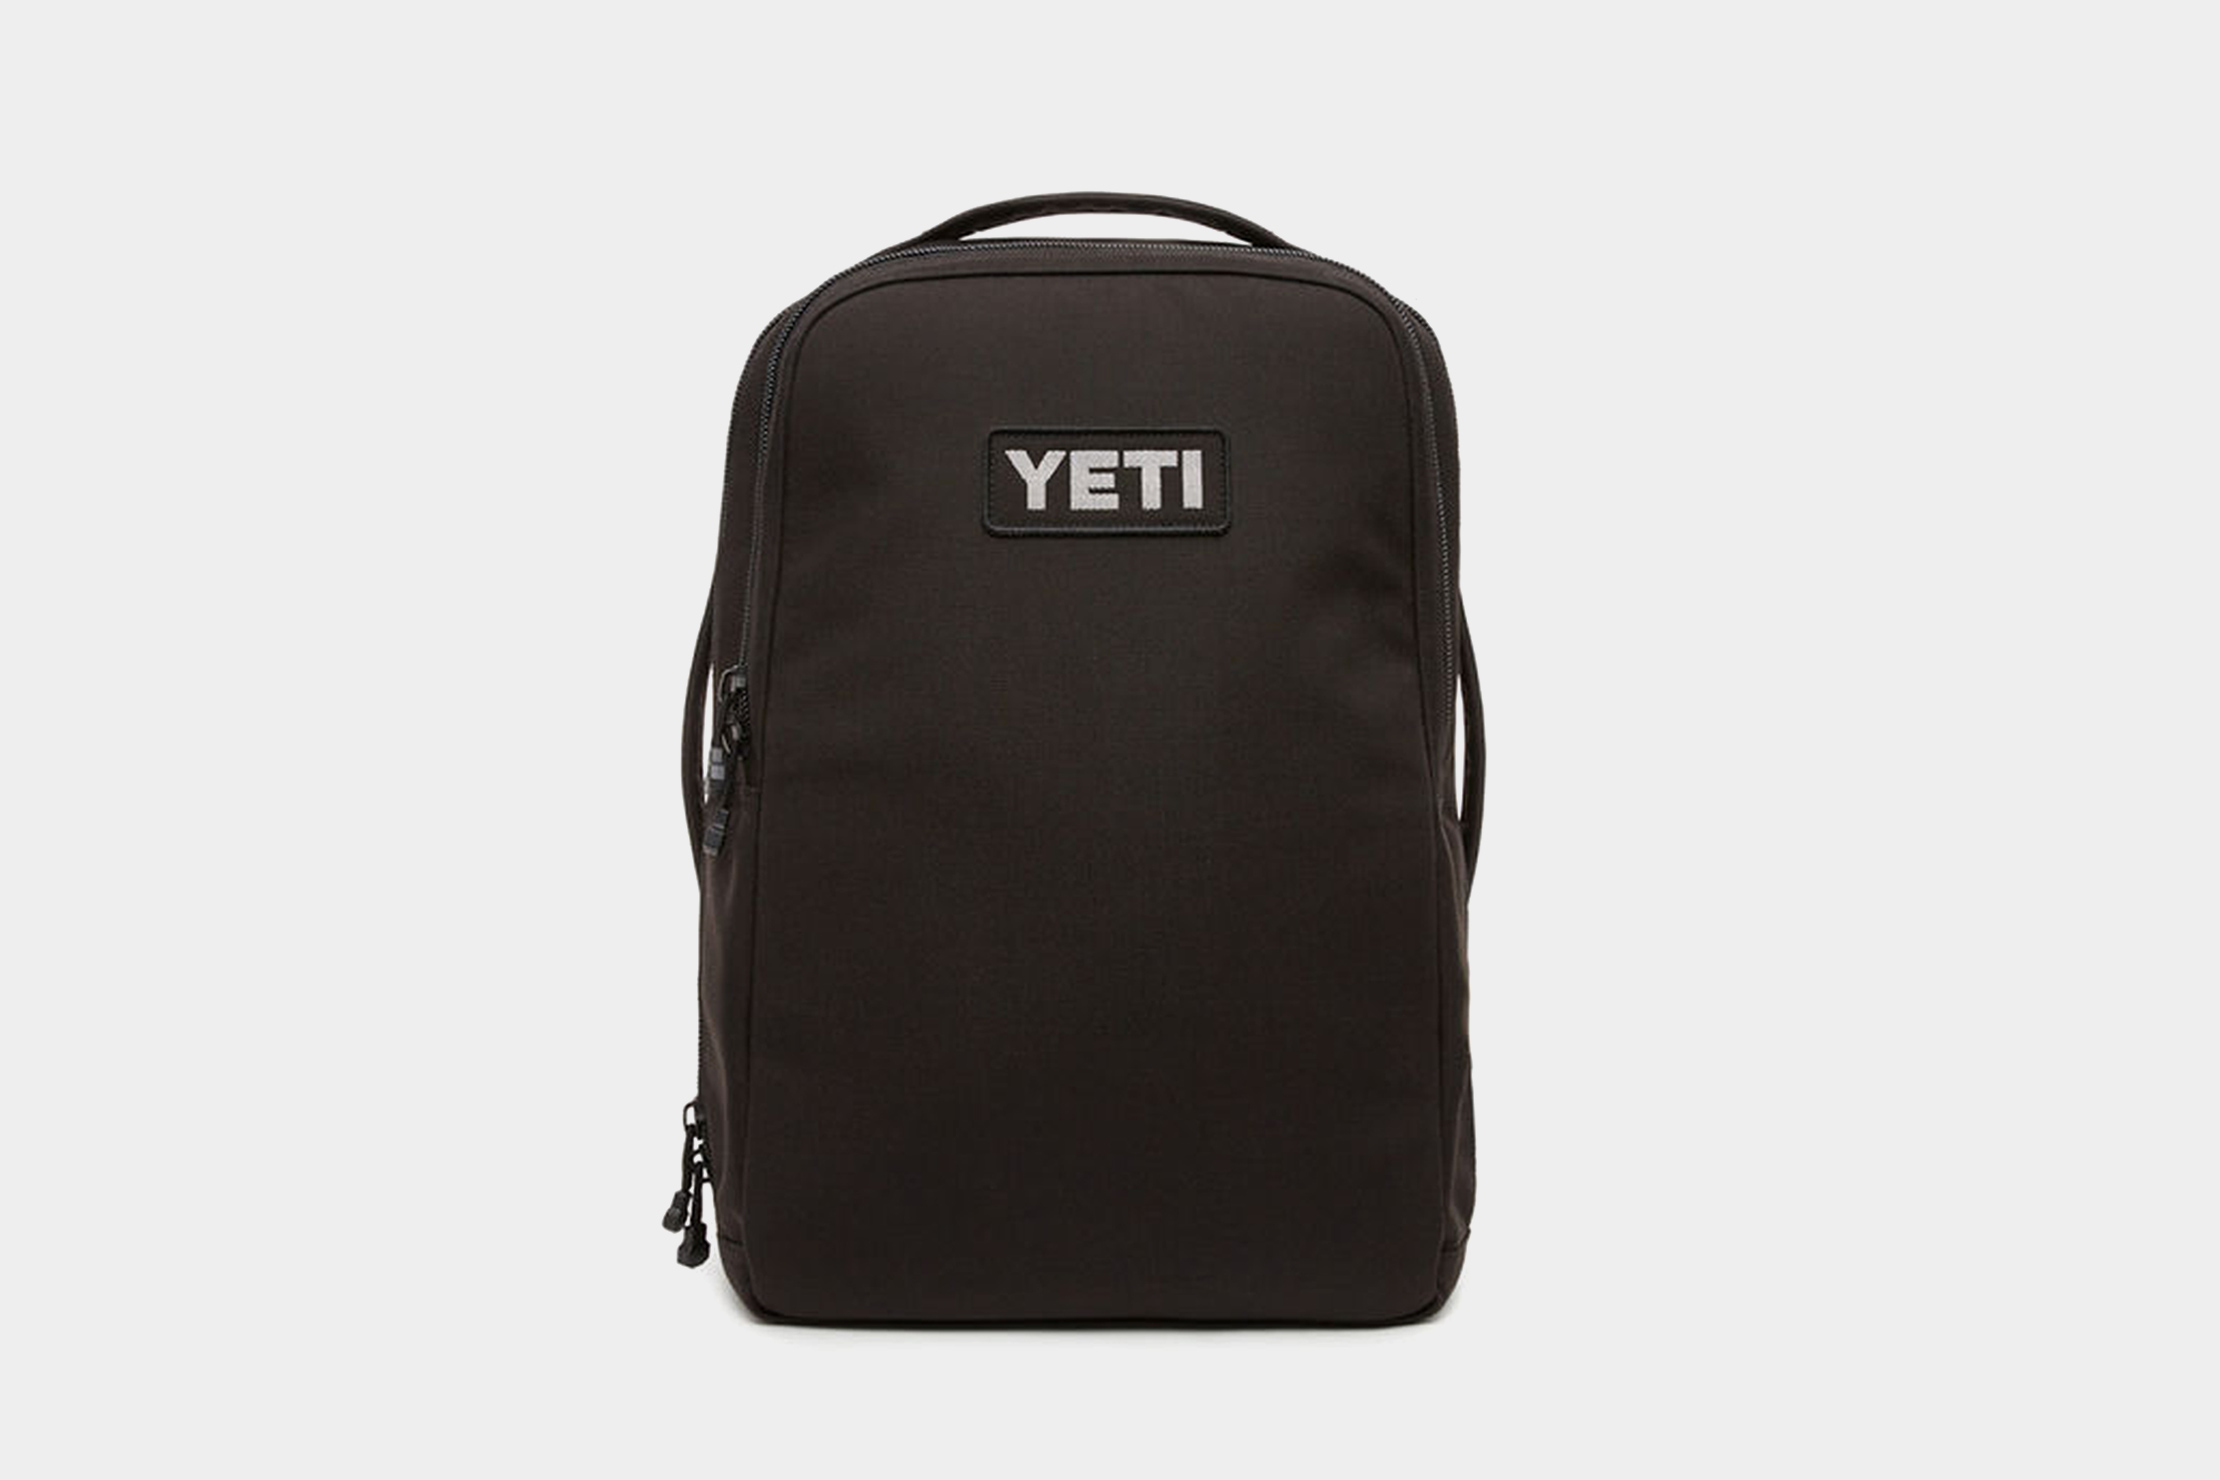 yeti backpack cooler dimensions